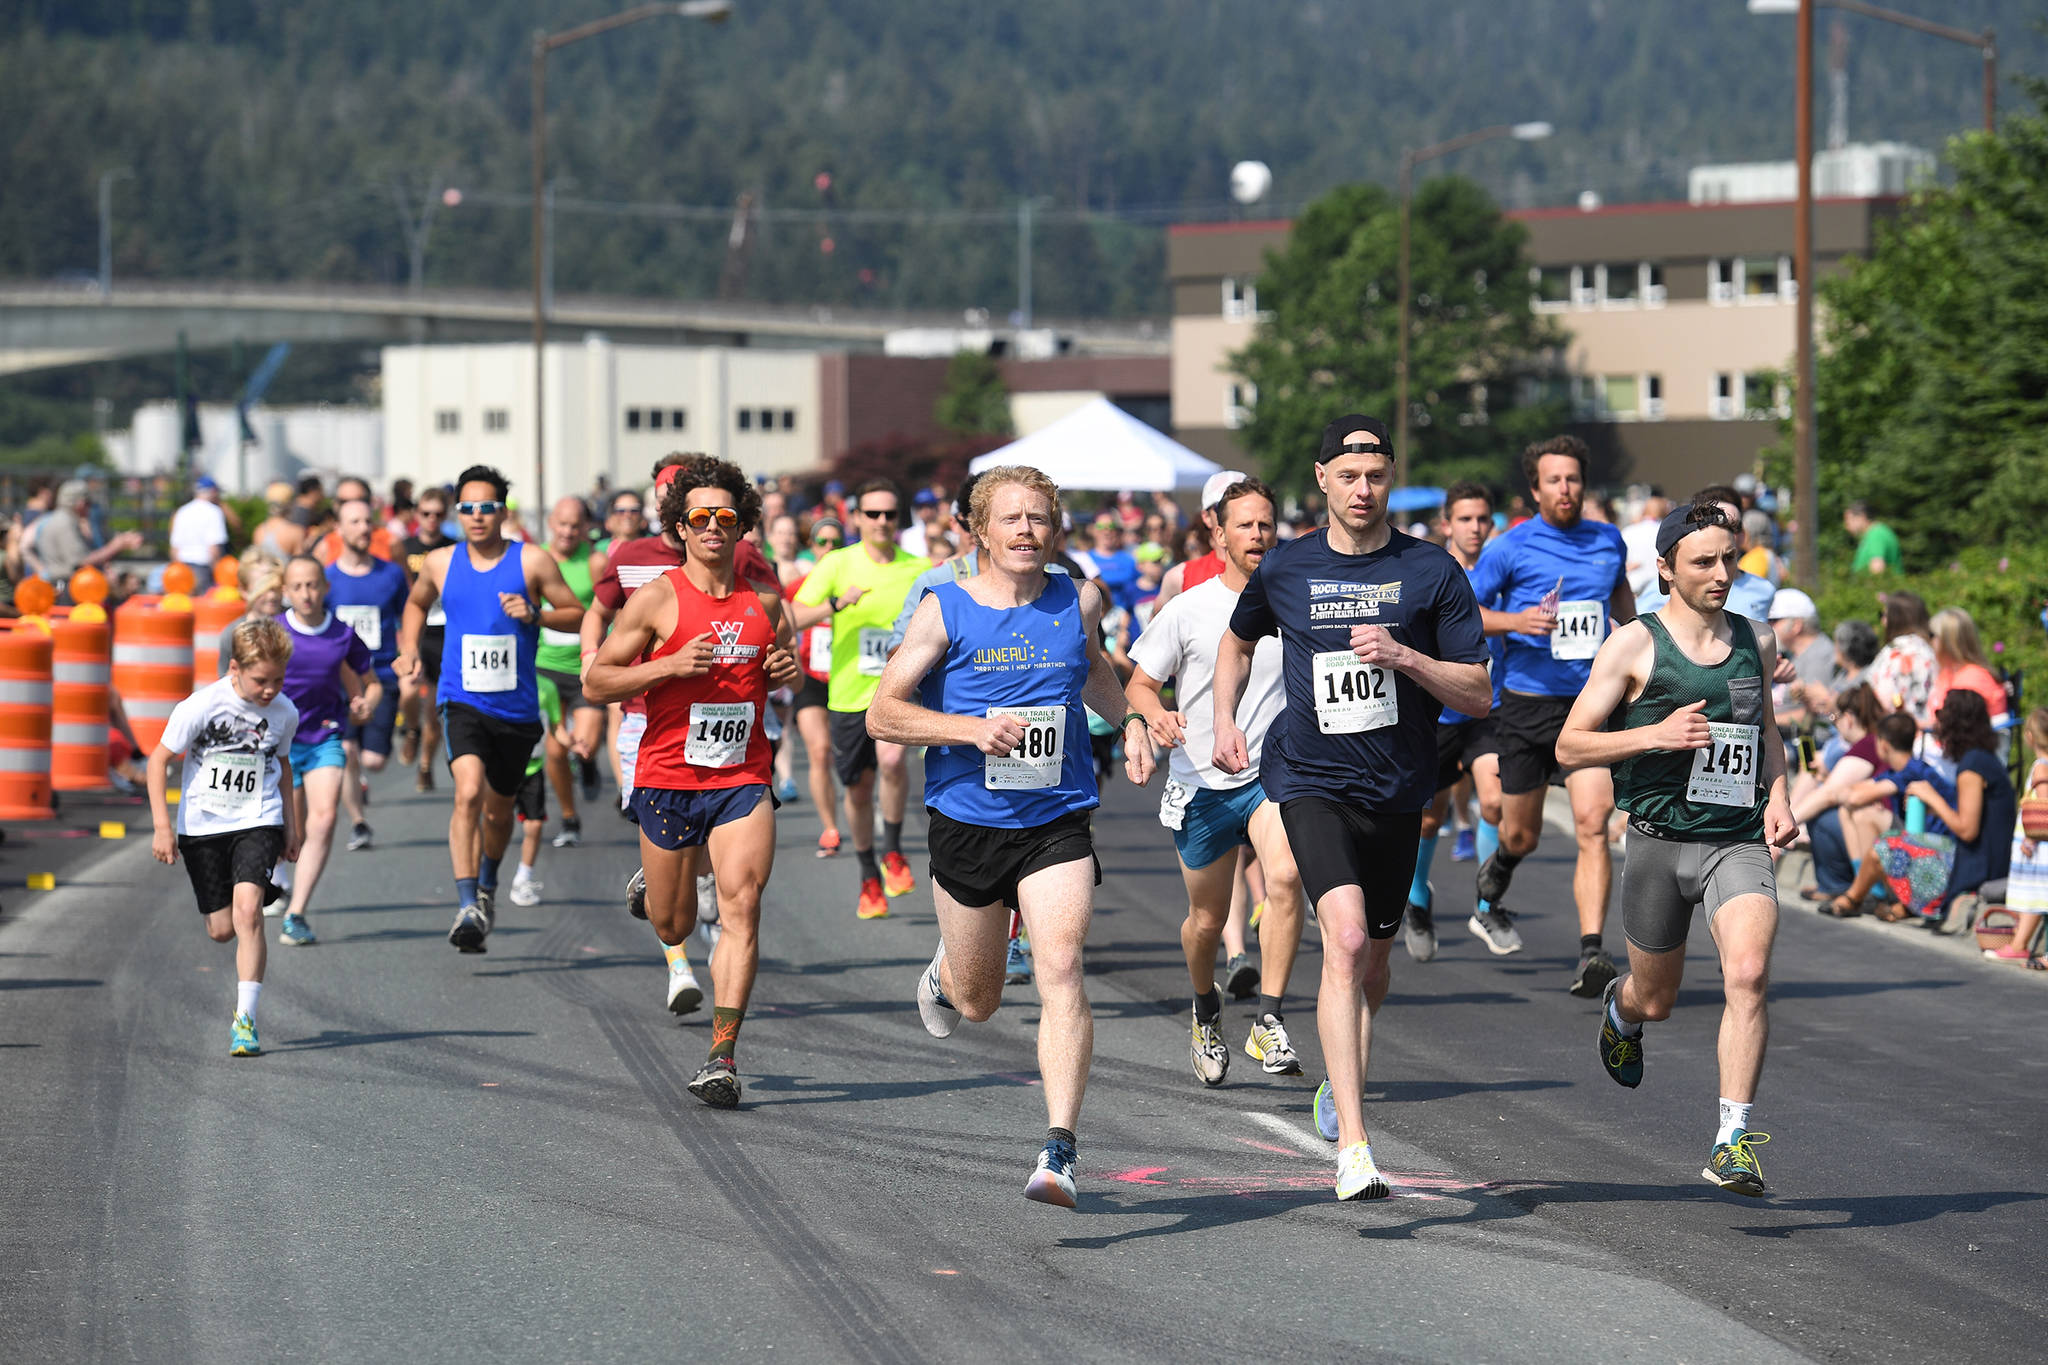 Glenn Frick Memorial Mile participants cruise down Egan Highway in the first half-mile of the race on Thursday, July 4, 2019. (Michael Penn | Juneau Empire)